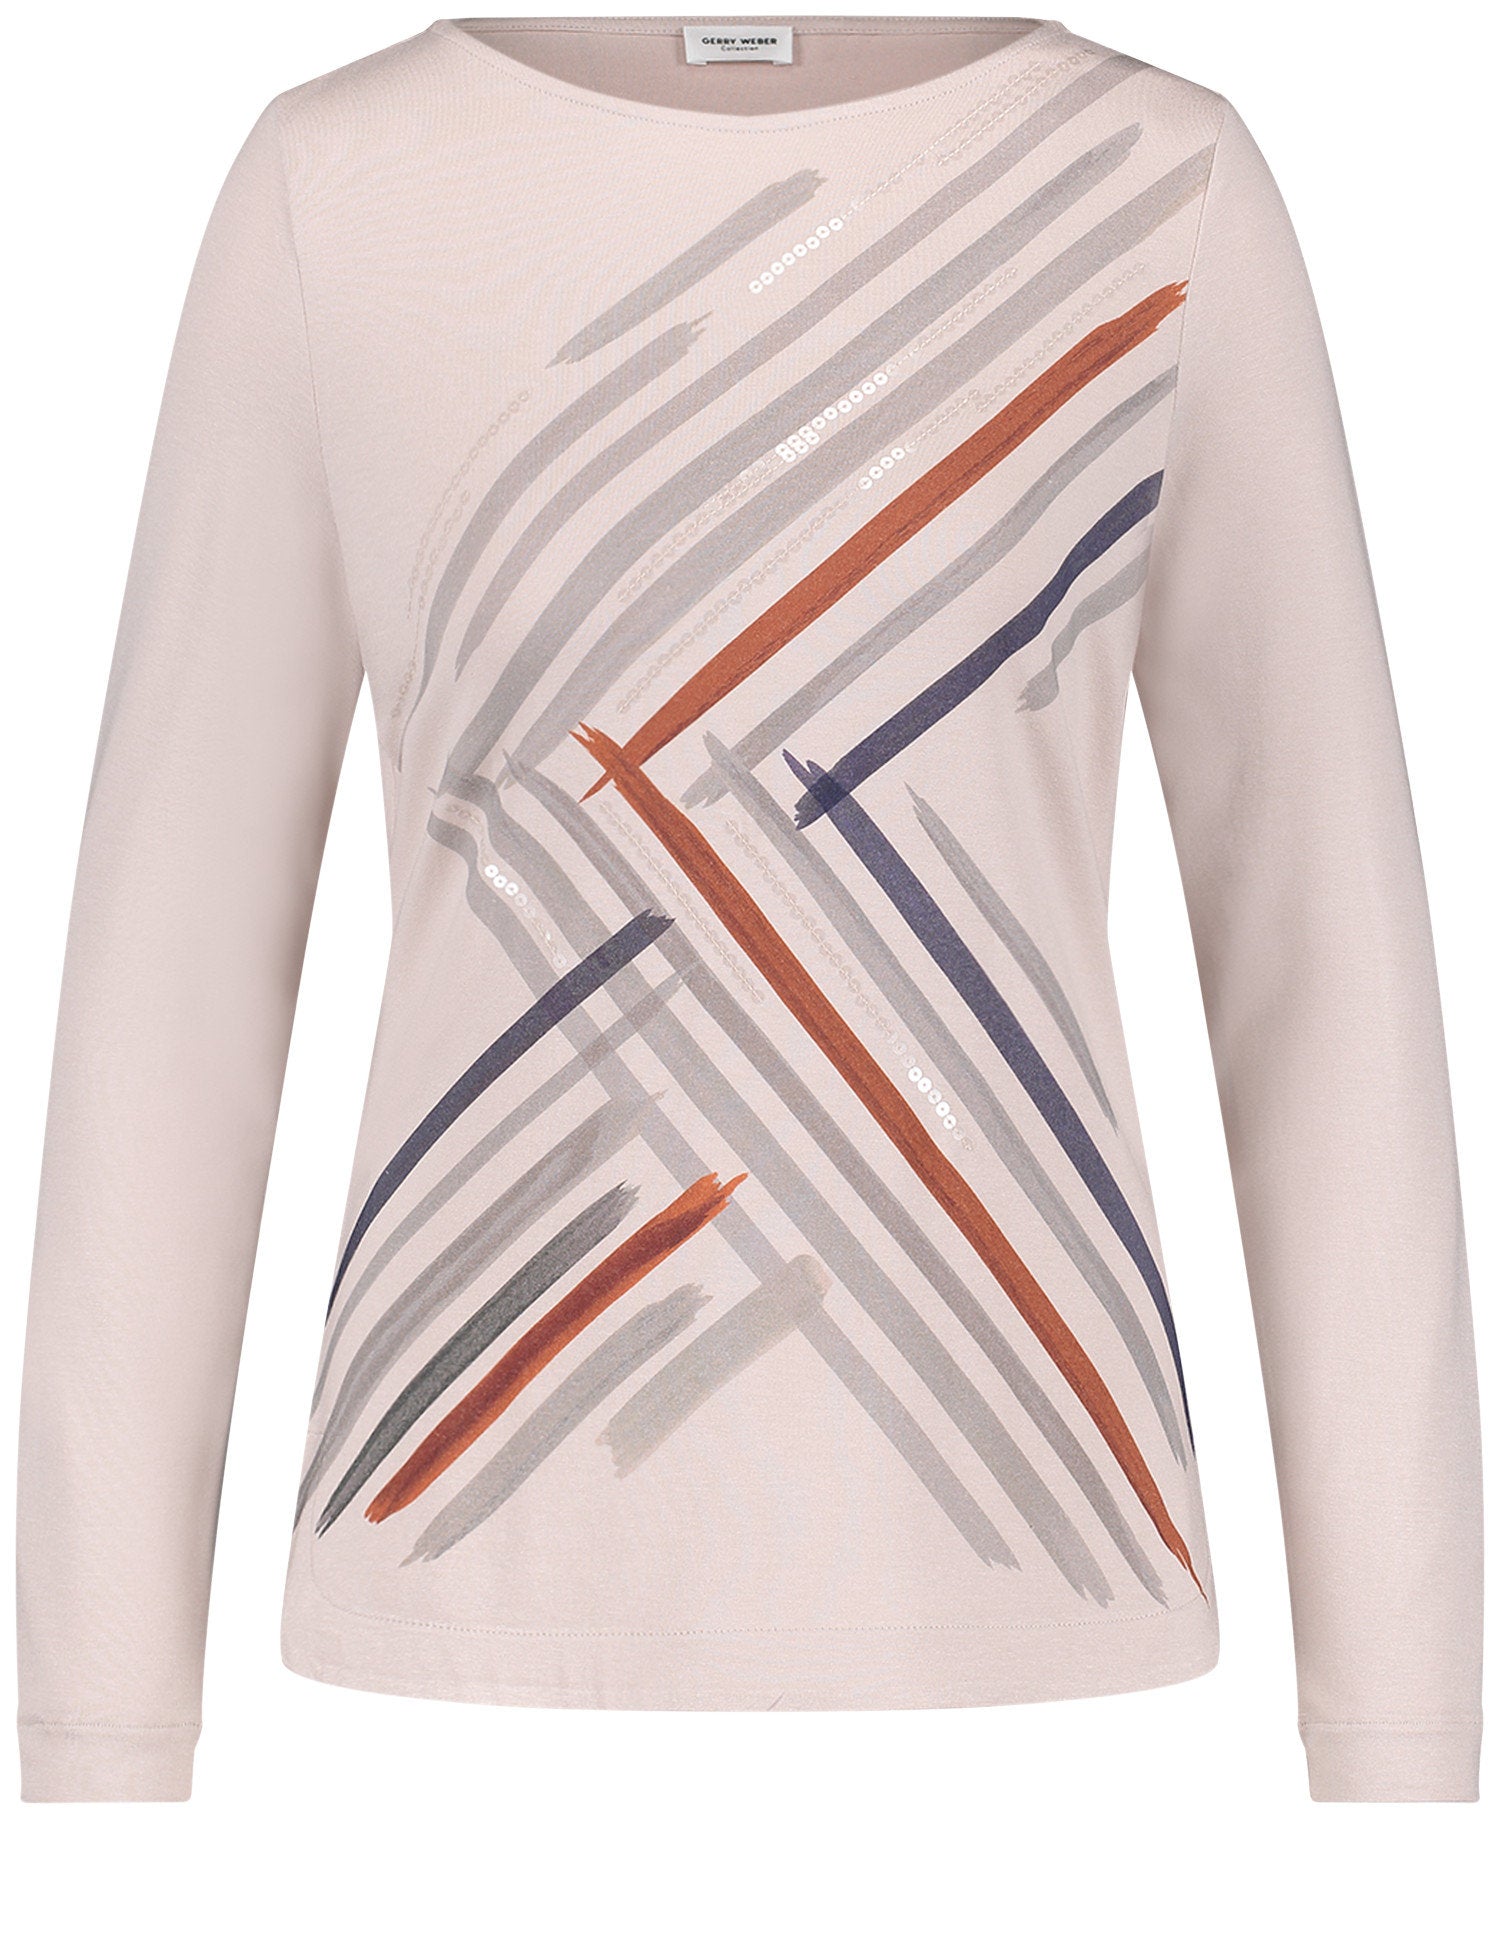  Graphic Long Sleeve T-Shirt_270233-35038_9068_01